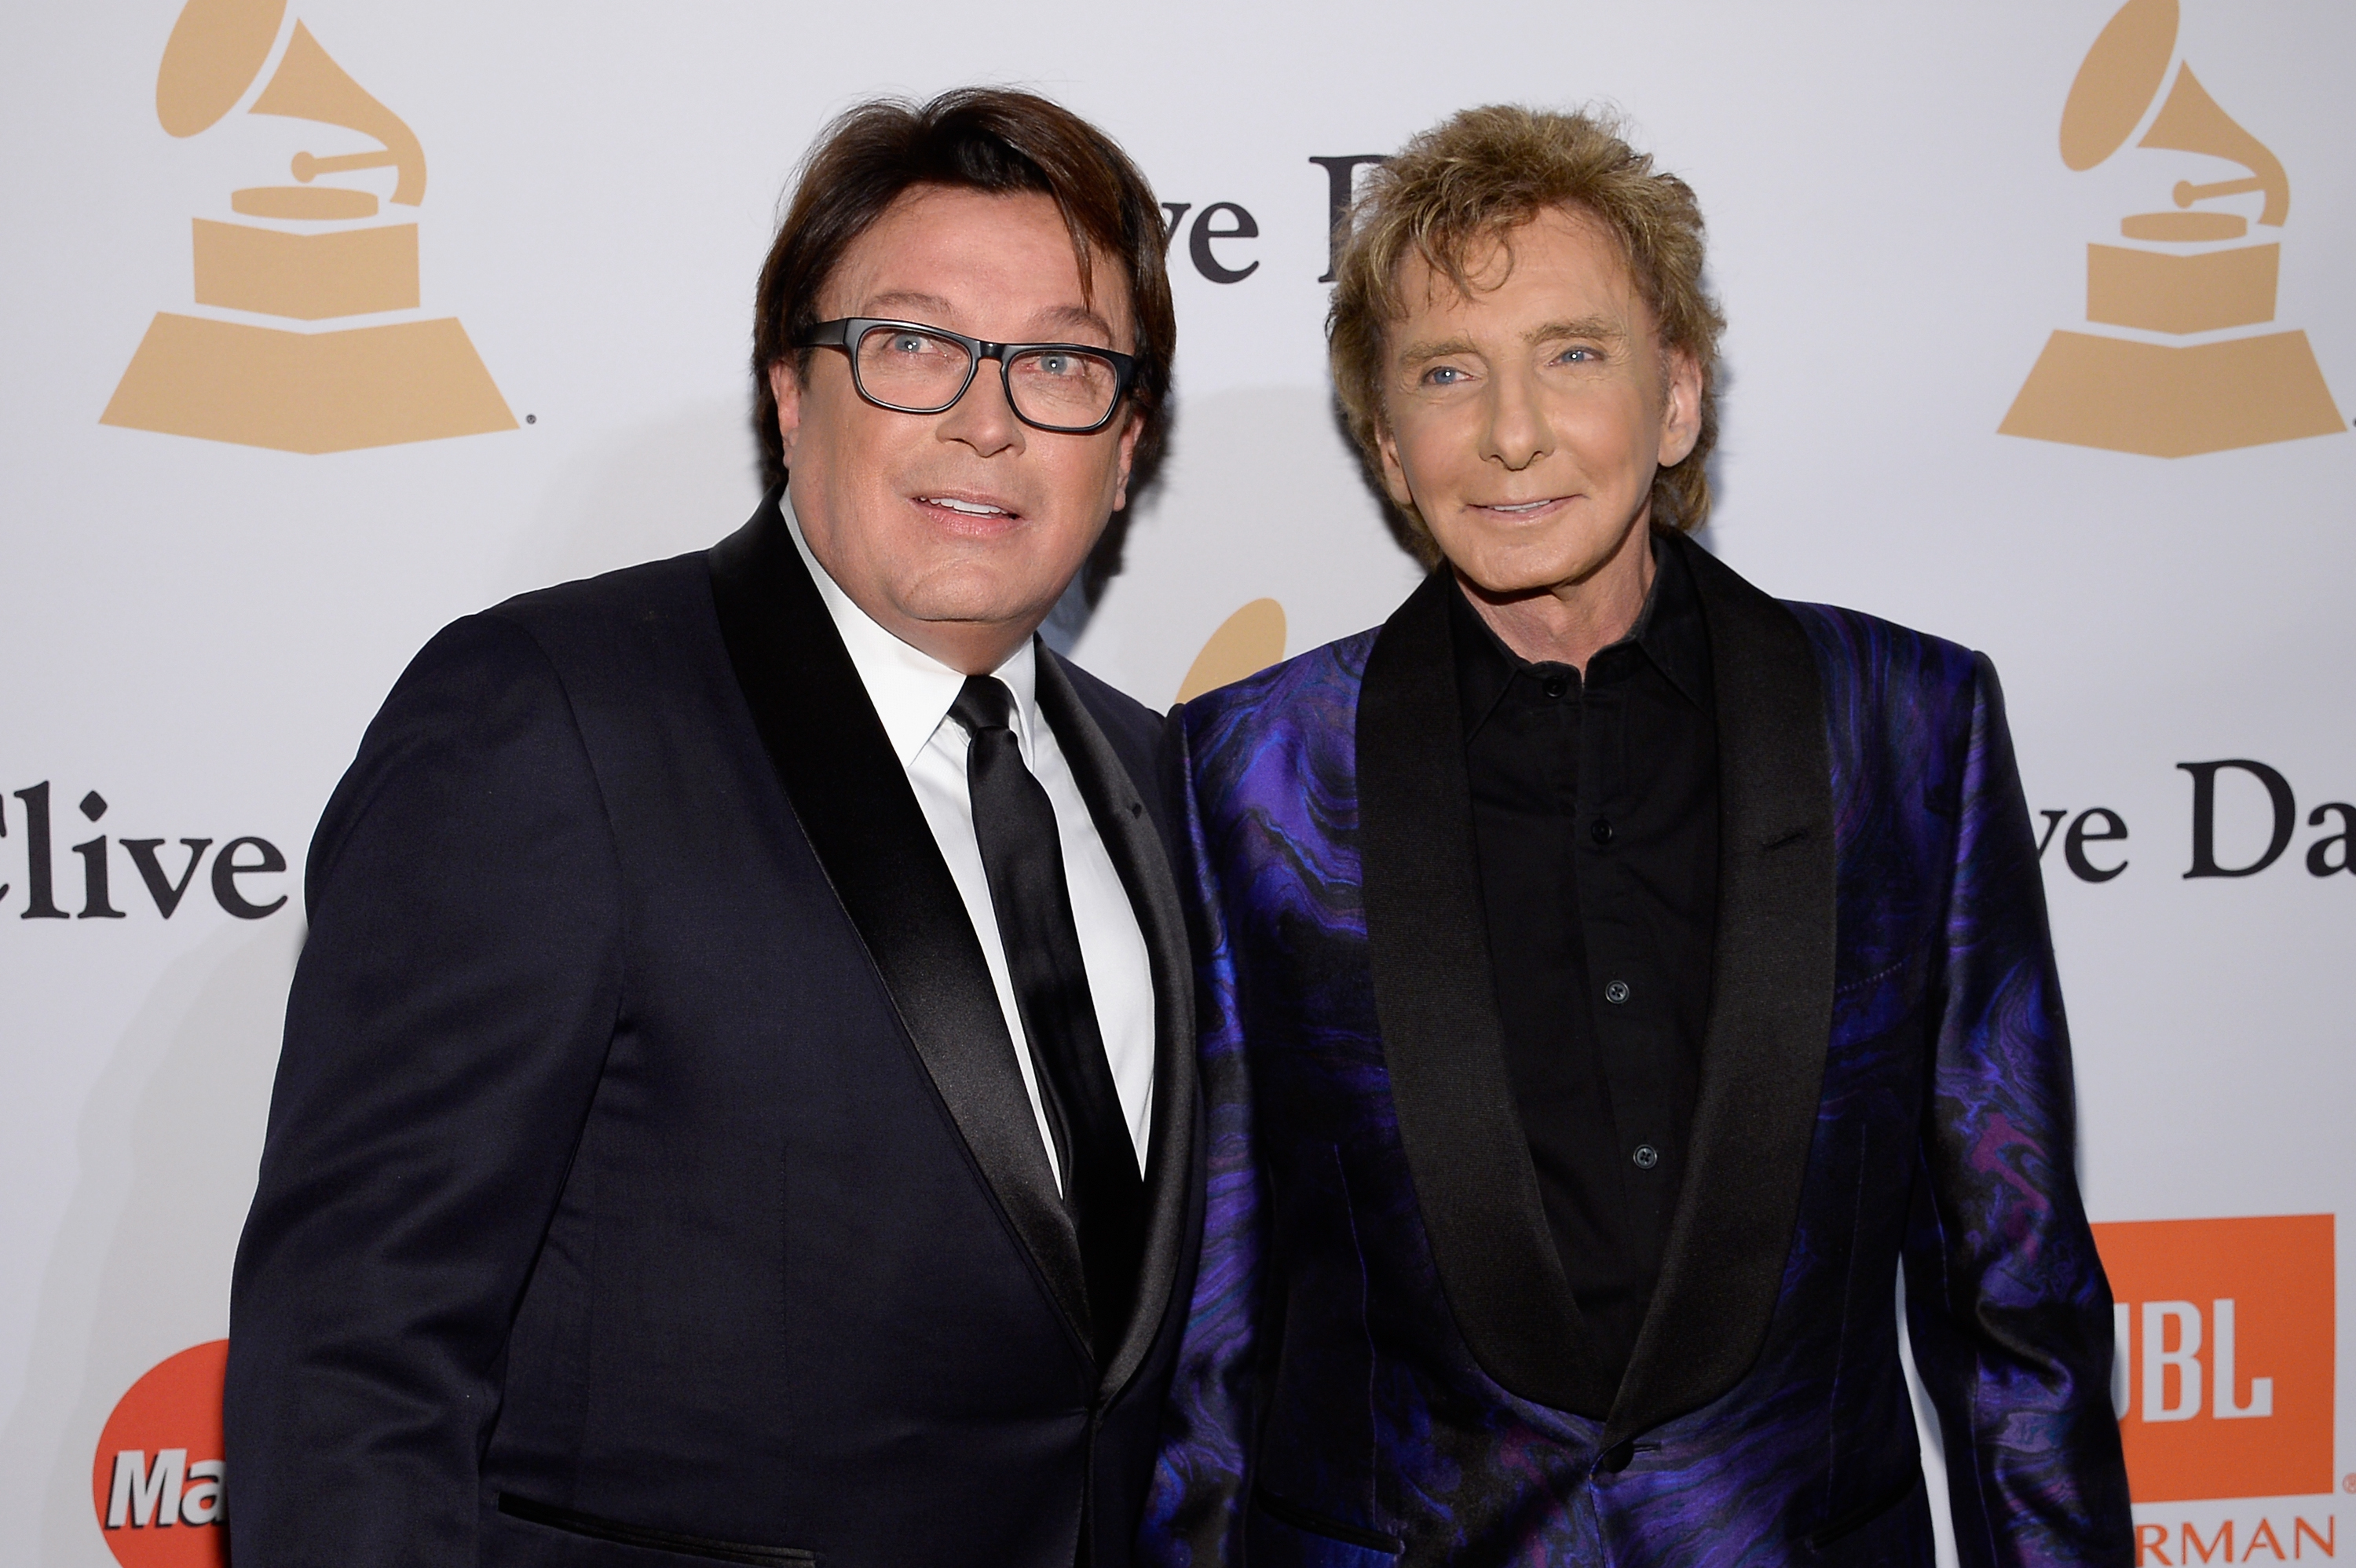 Garry Kief and Barry Manilow attend the 2016 Pre-GRAMMY Gala at The Beverly Hilton Hotel on February 14, 2016, in Beverly Hills, California. | Source: Getty Images